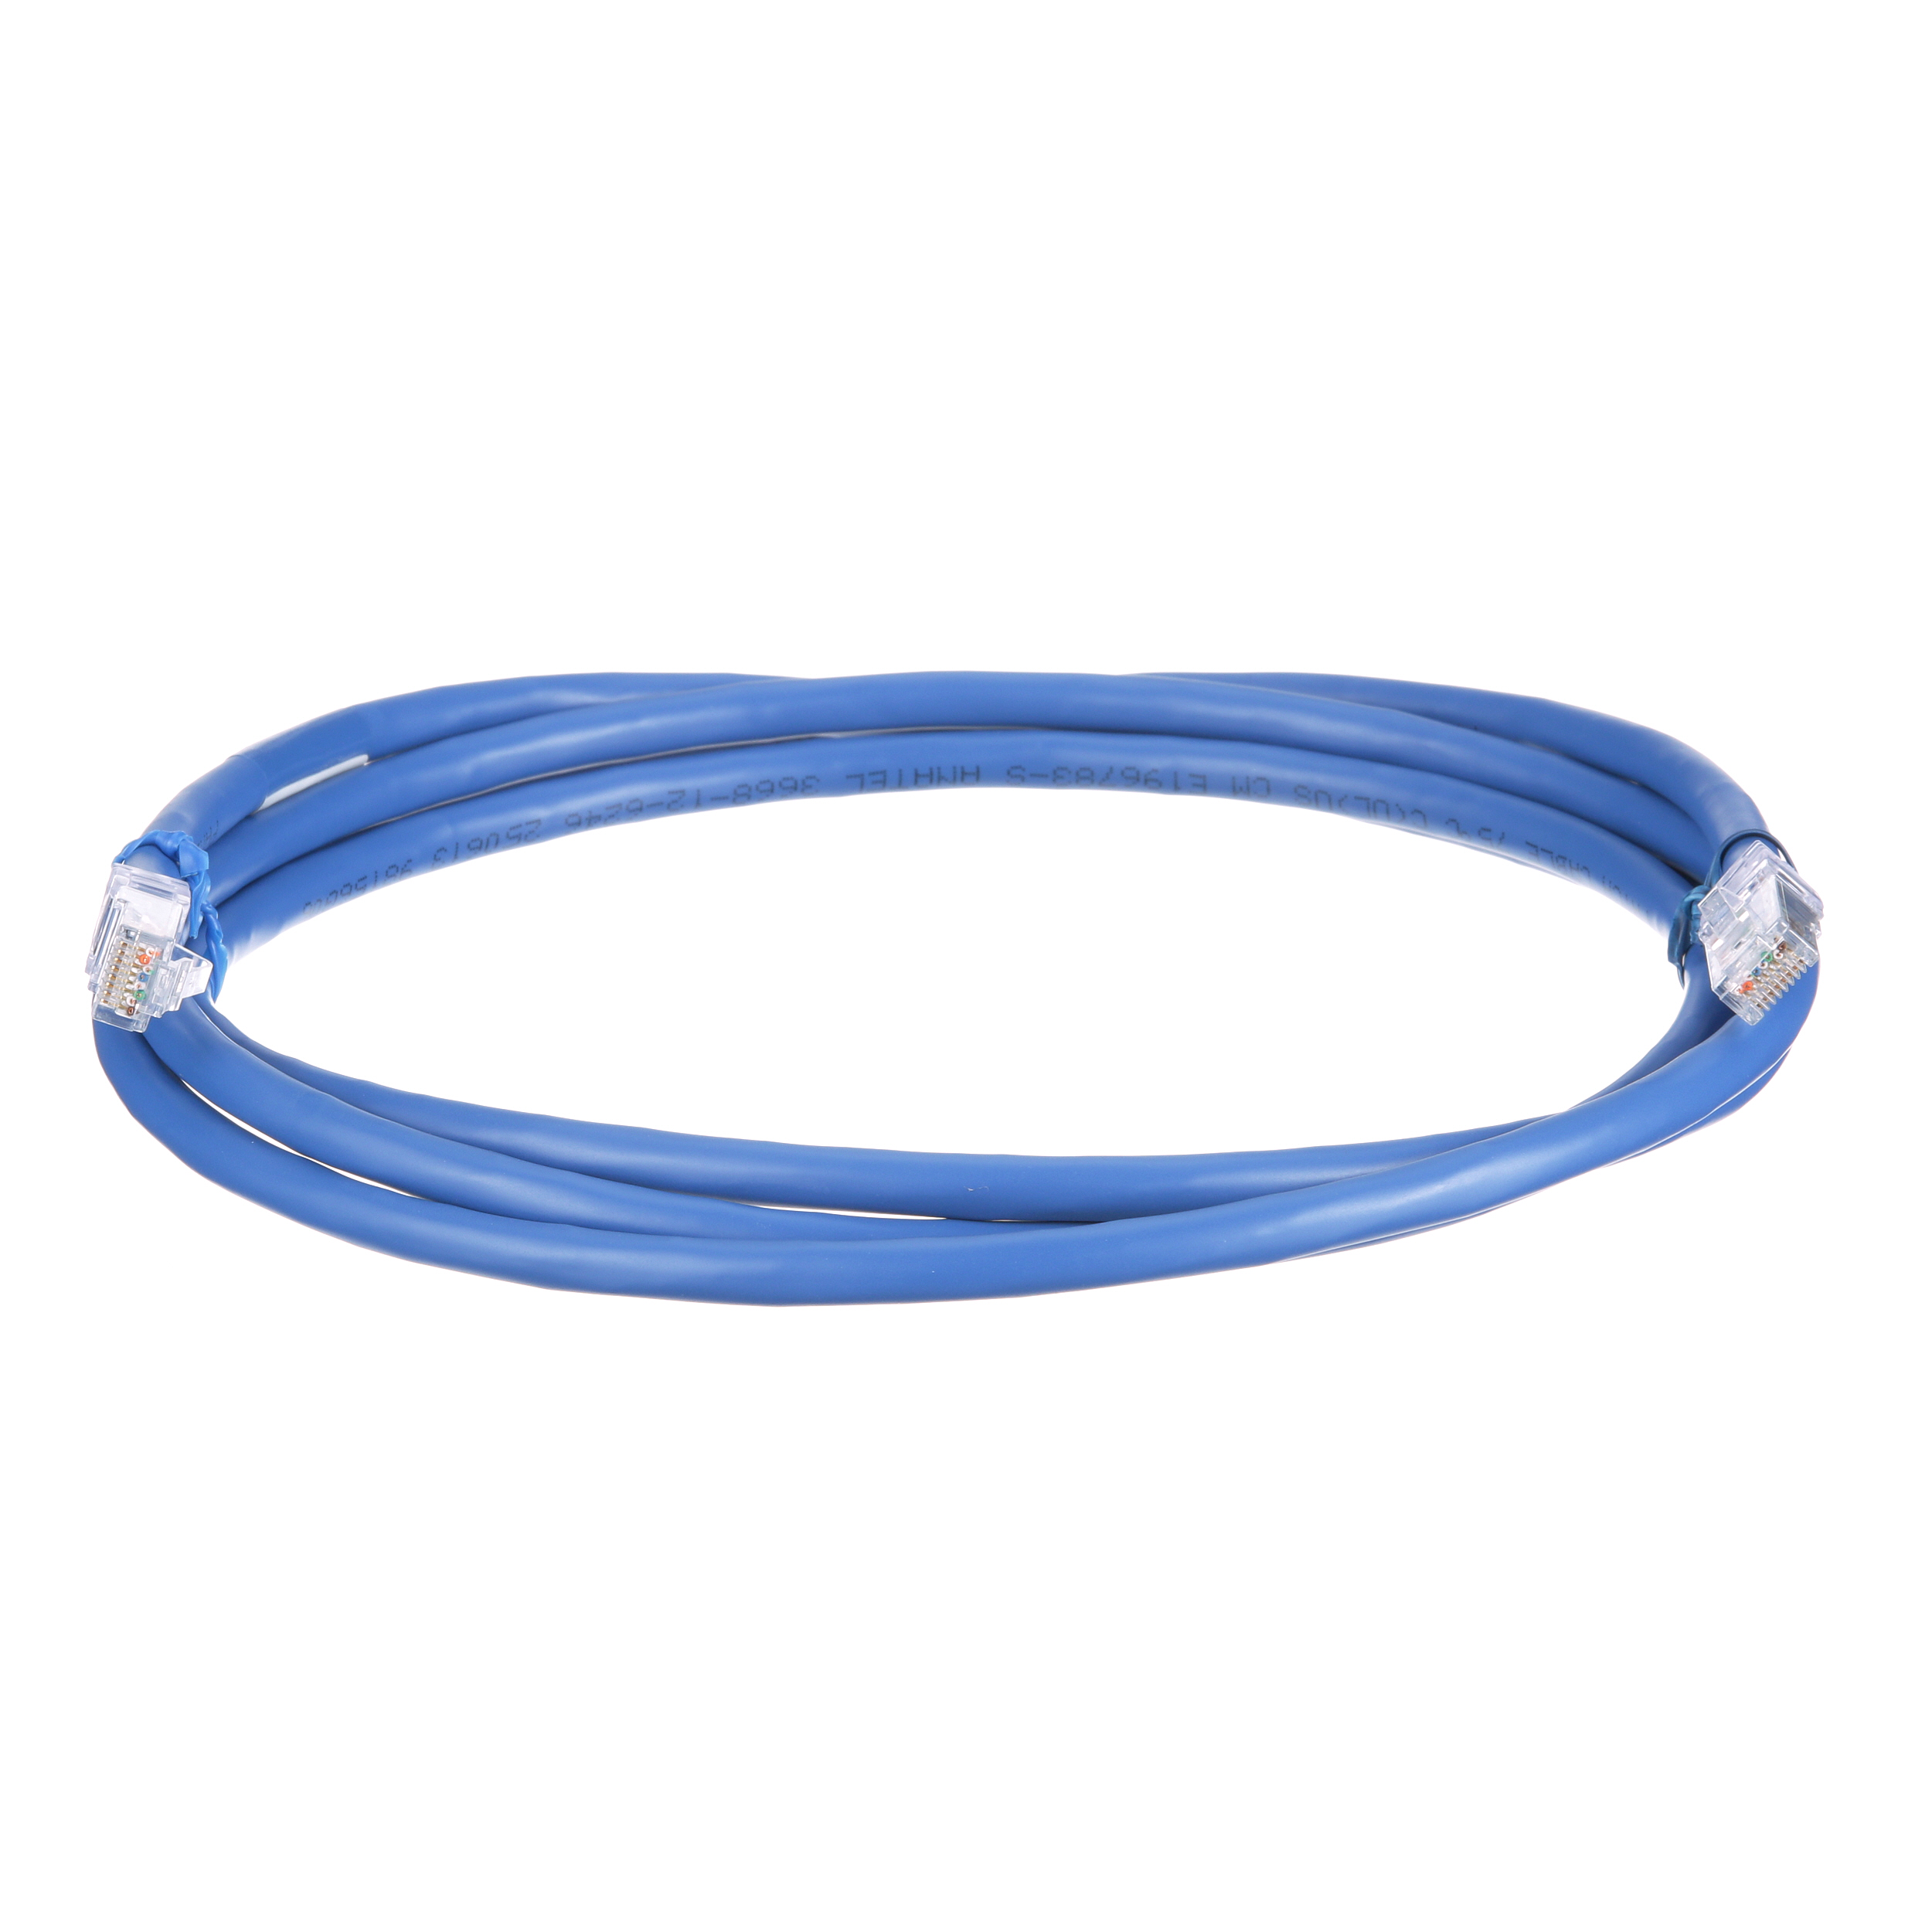 Patch cord, 24 AWG, Cat. 6A, RJ45, 21 ft., Blue